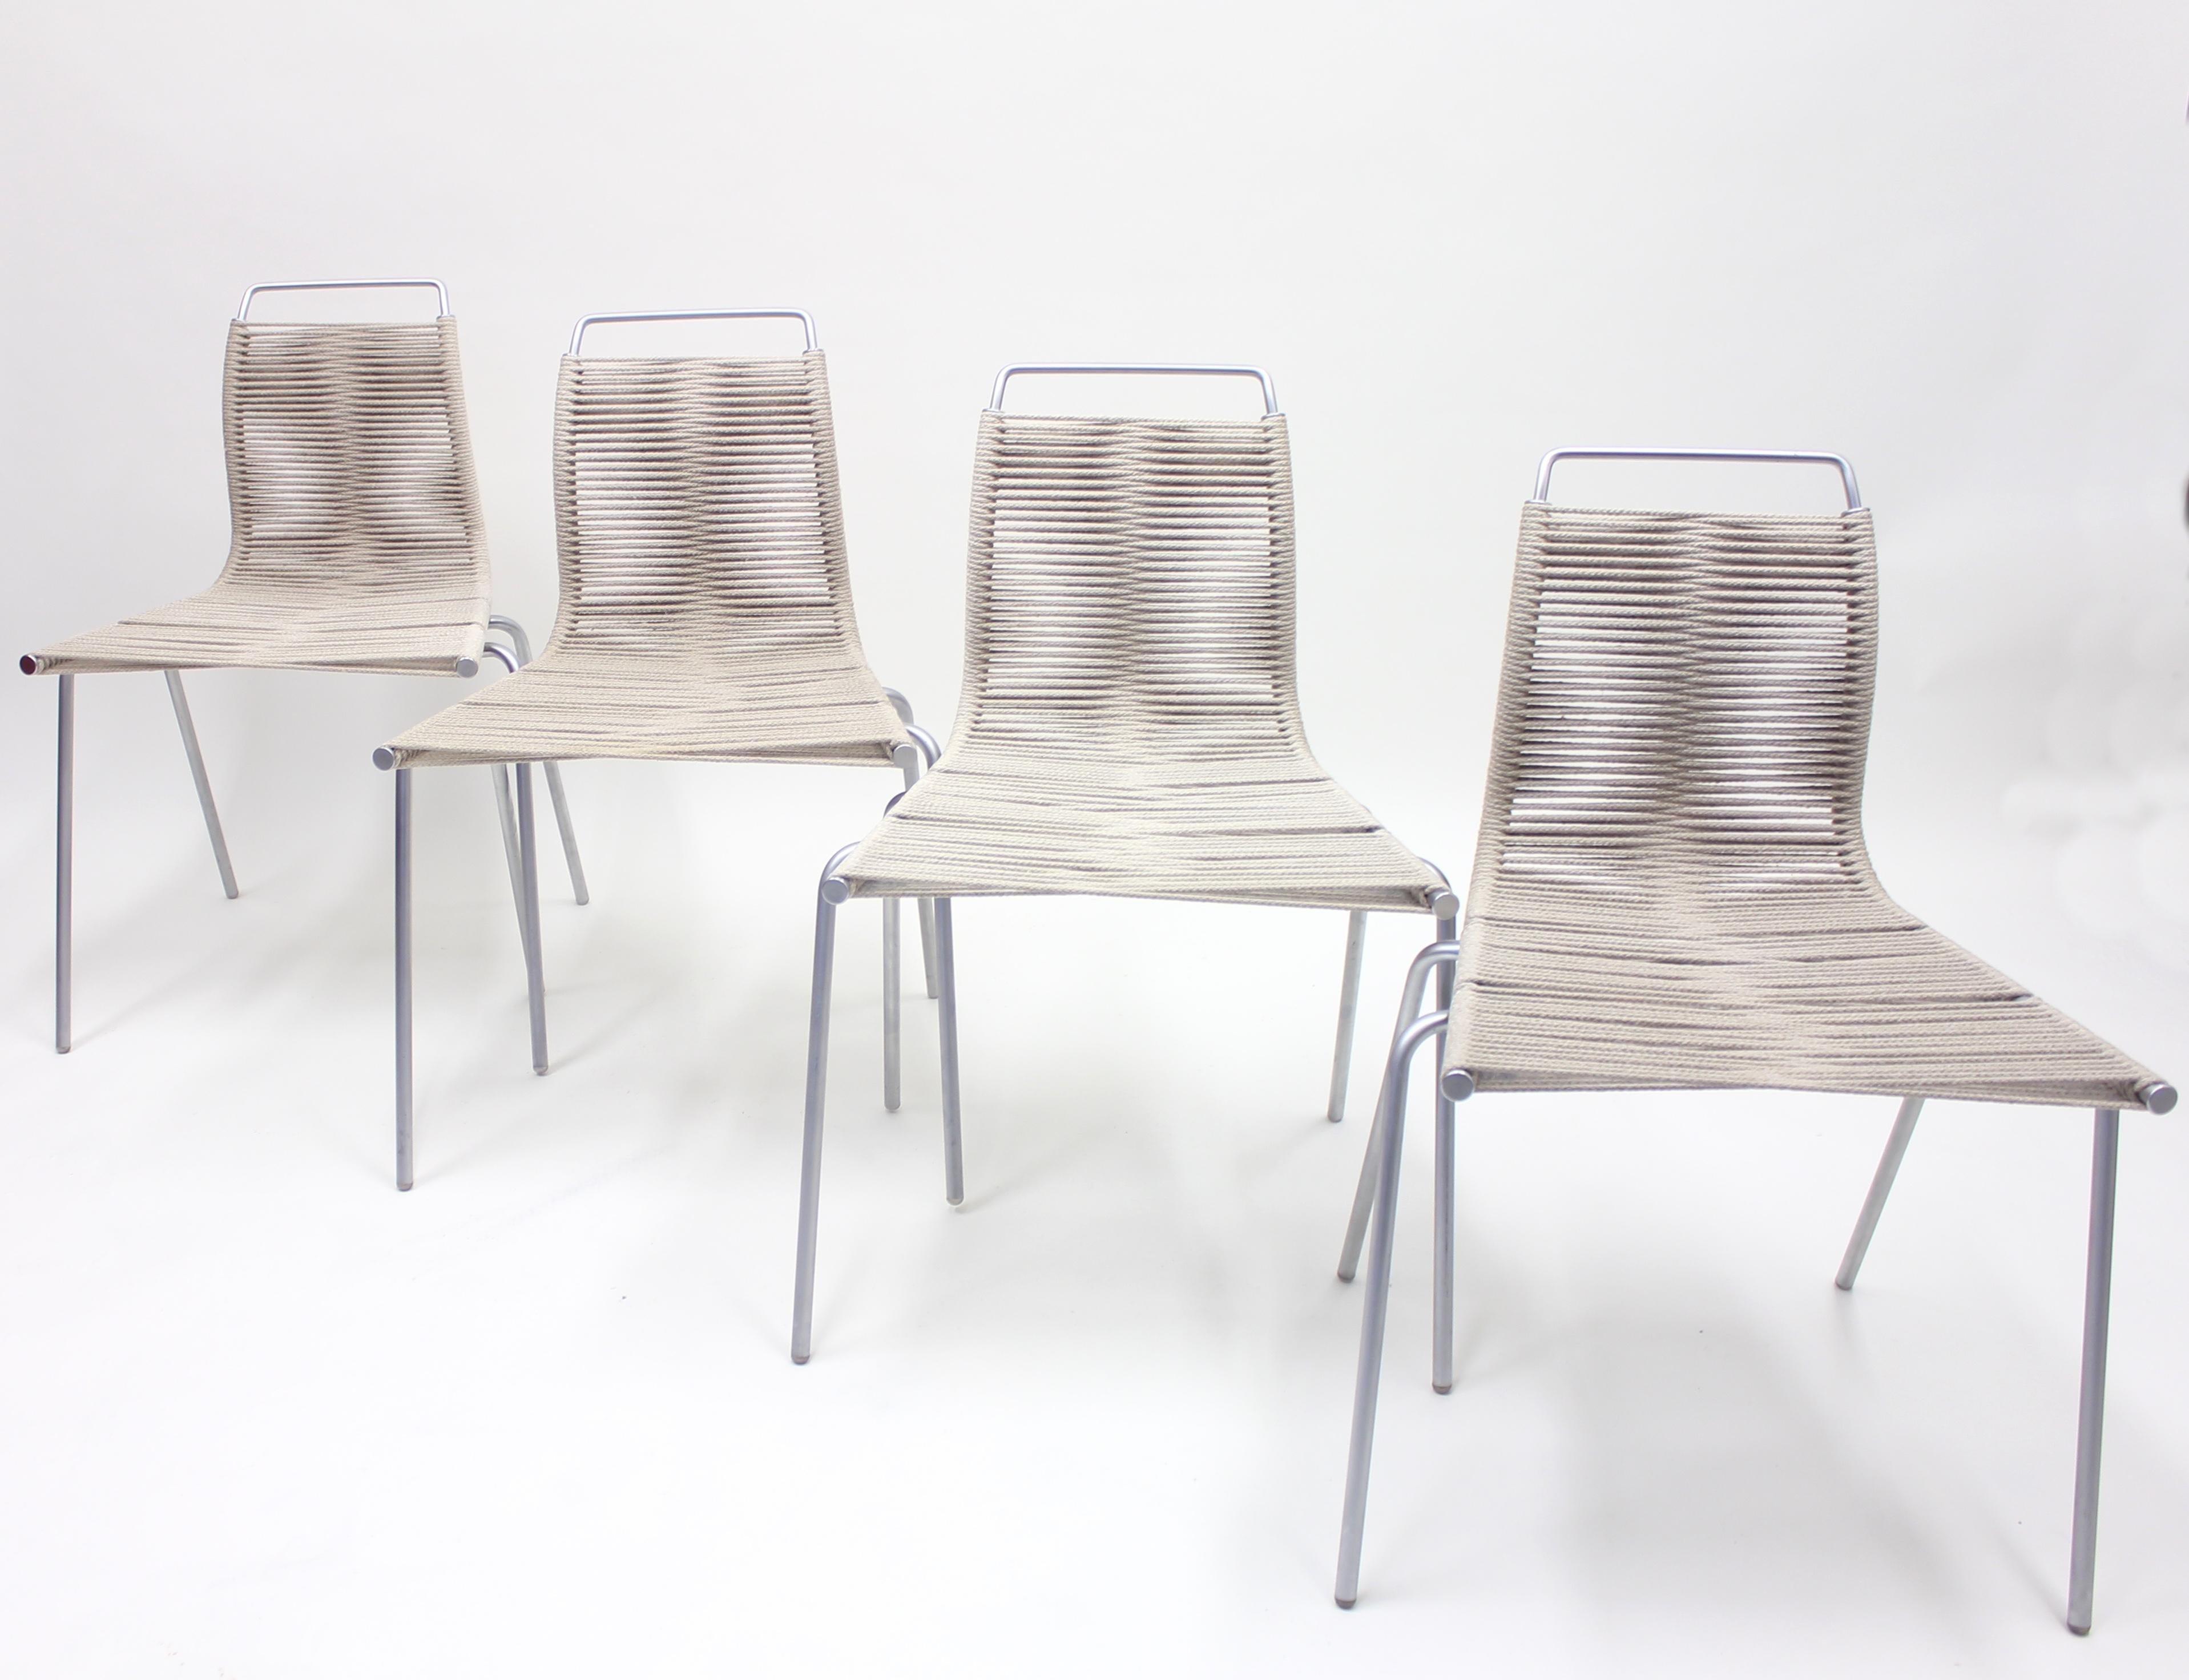 Mid-20th Century PK1 Chairs by Poul Kjærholm for Thorsen Møbler, Set of 4